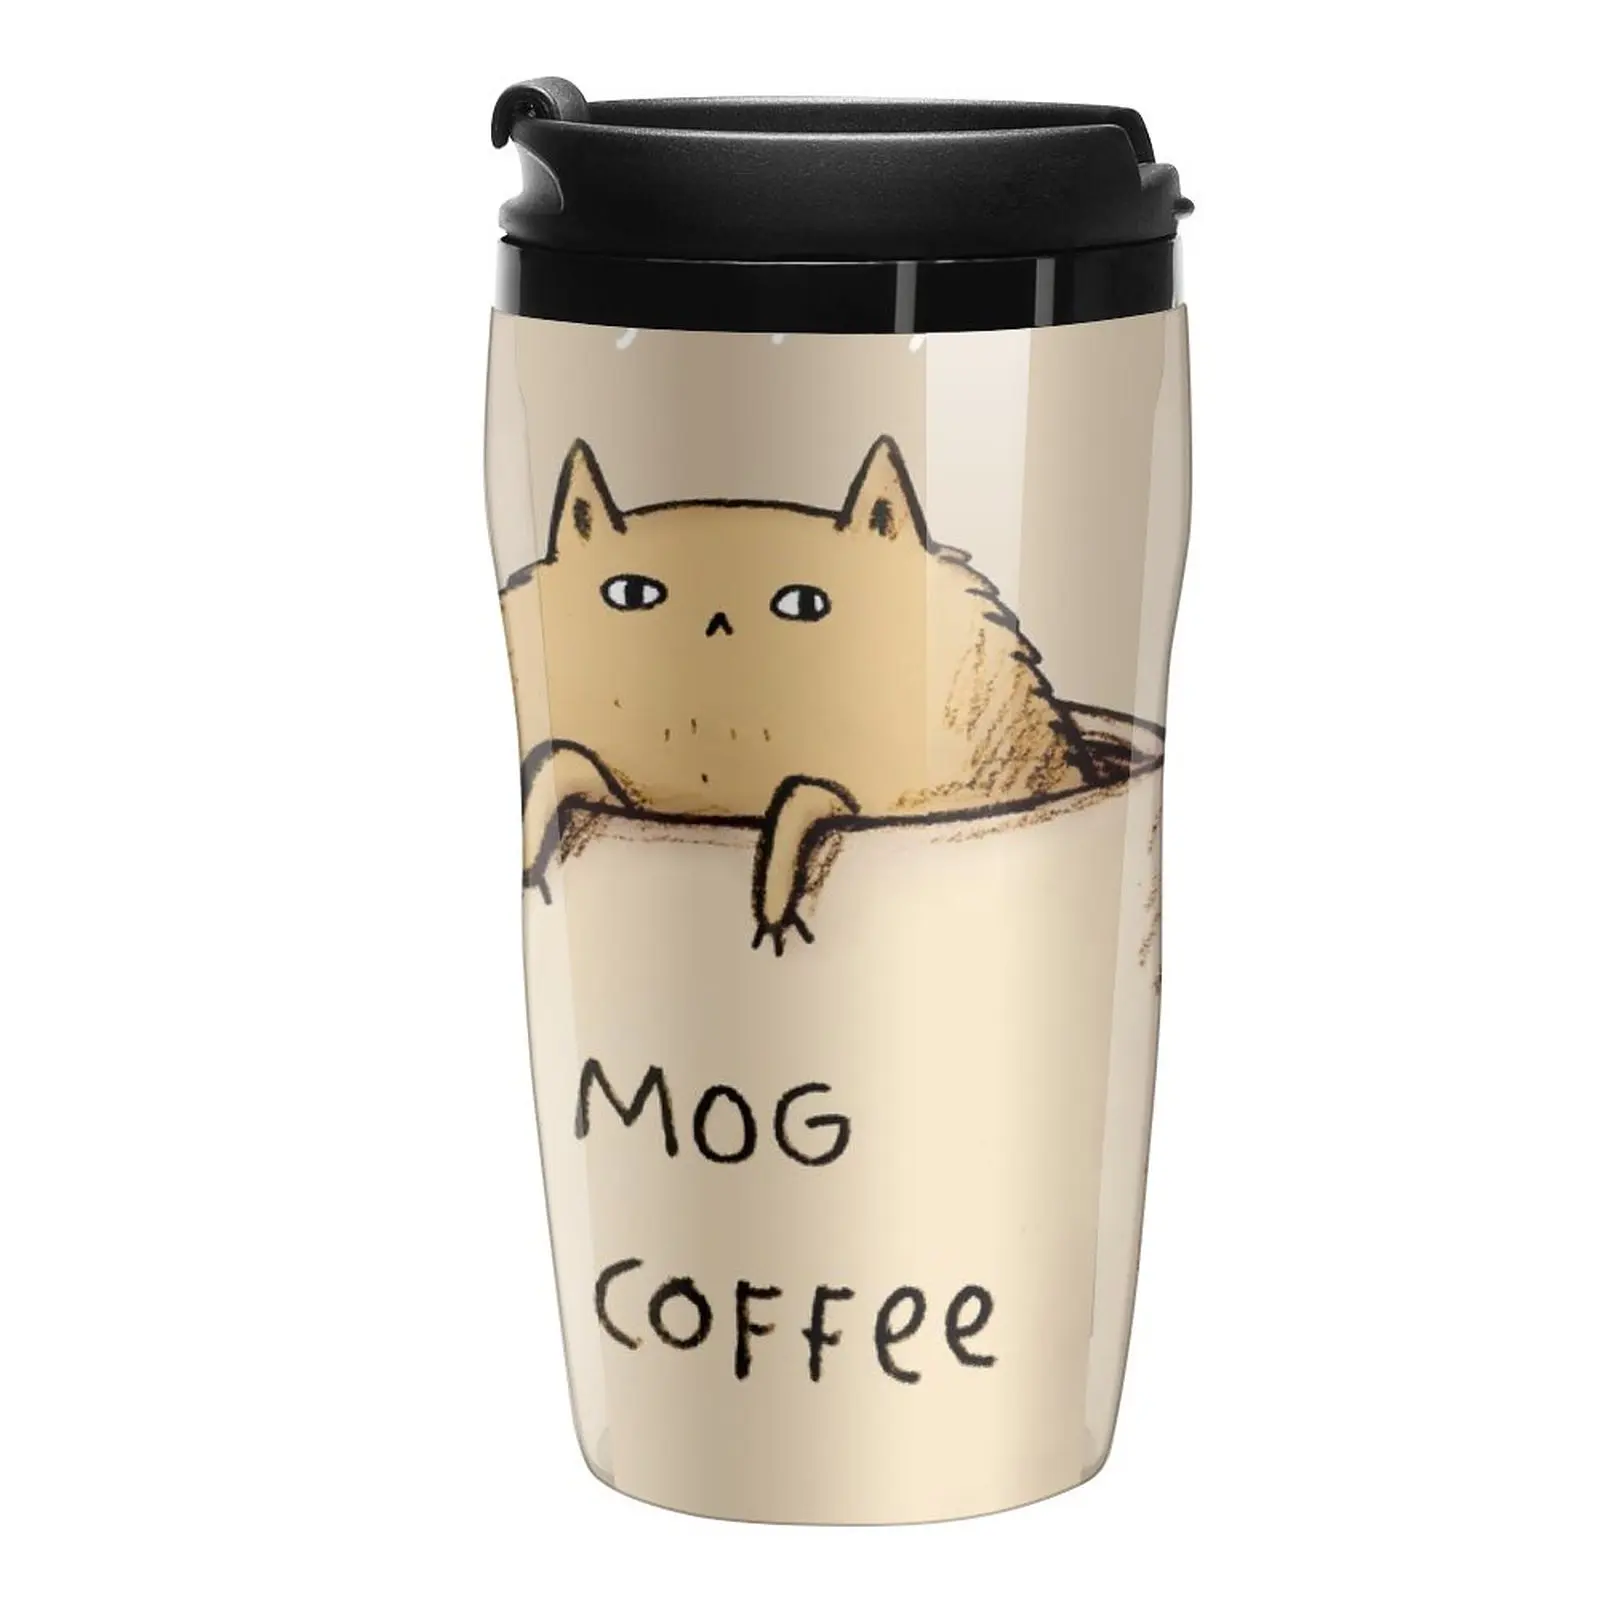 

New Mog of Coffee Travel Coffee Mug Luxury Cup Butterfly Cup Espresso Coffee Cups